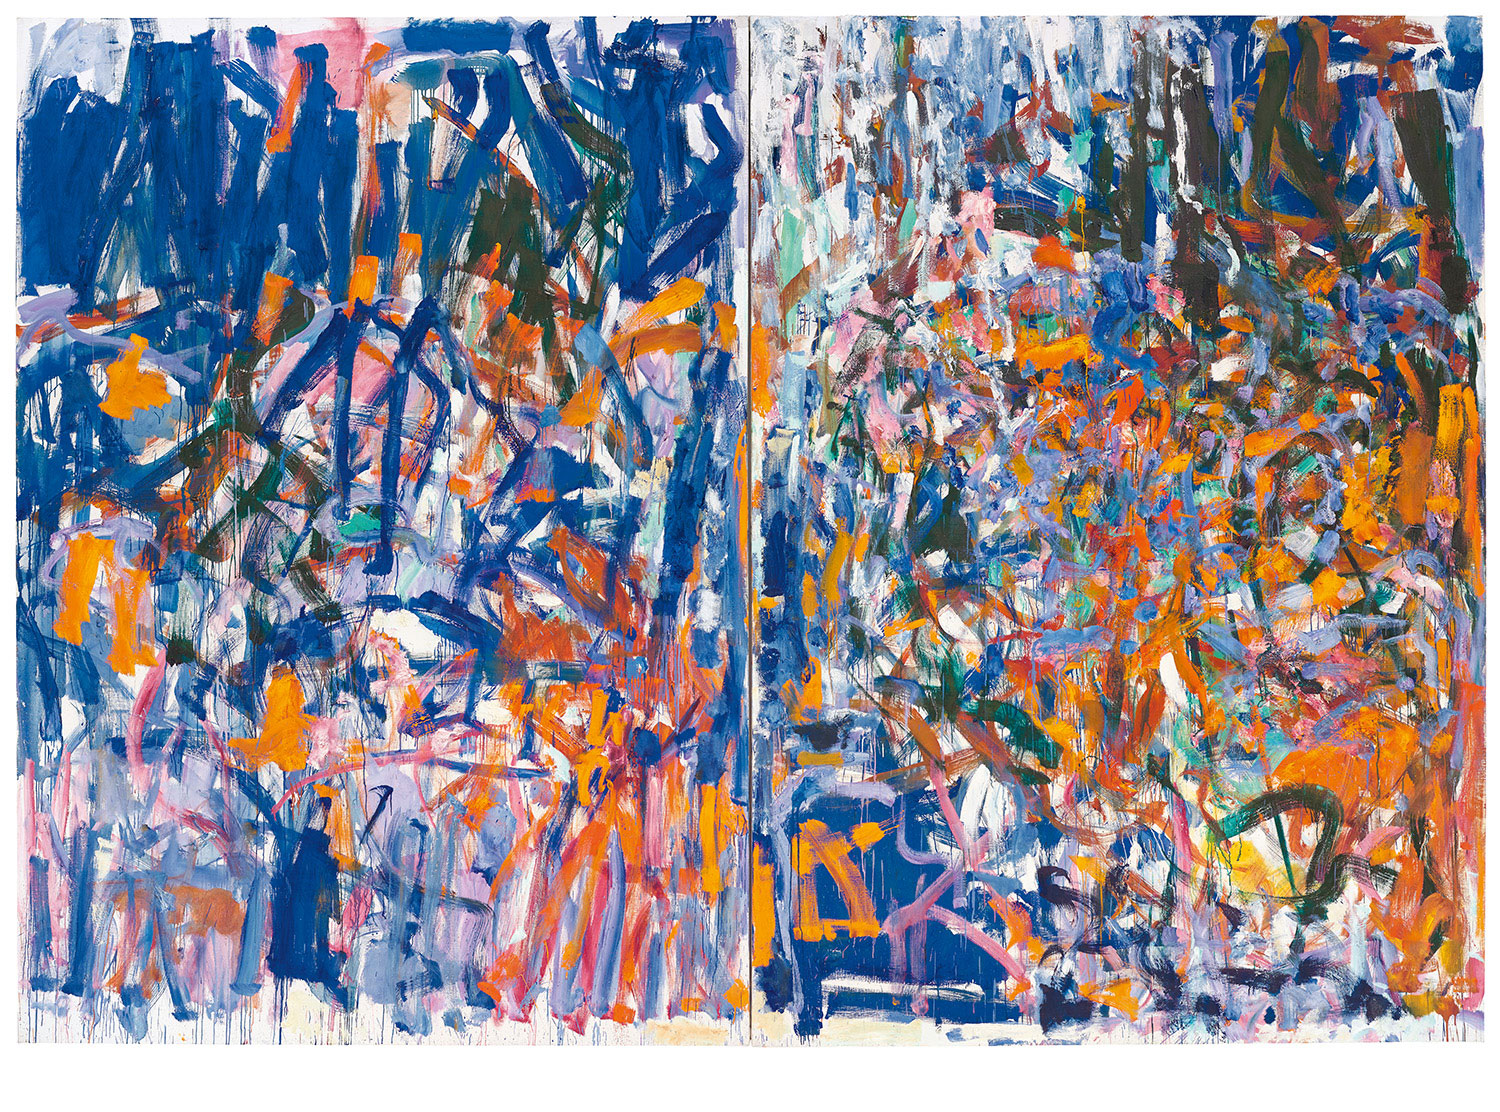 An abstract diptych painting dominated by blue, orange and pink brushstrokes.